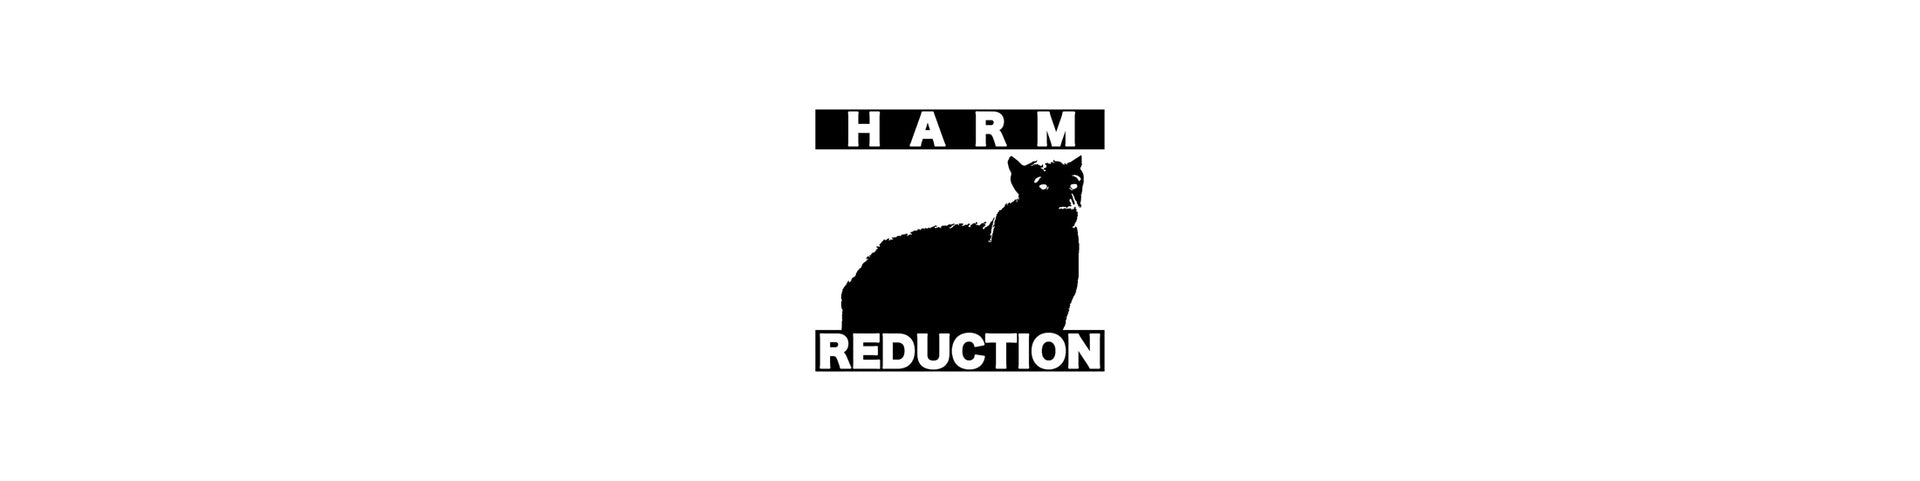 Shop – Harm Reduction Records – Band & Music Merch – Cold Cuts Merch